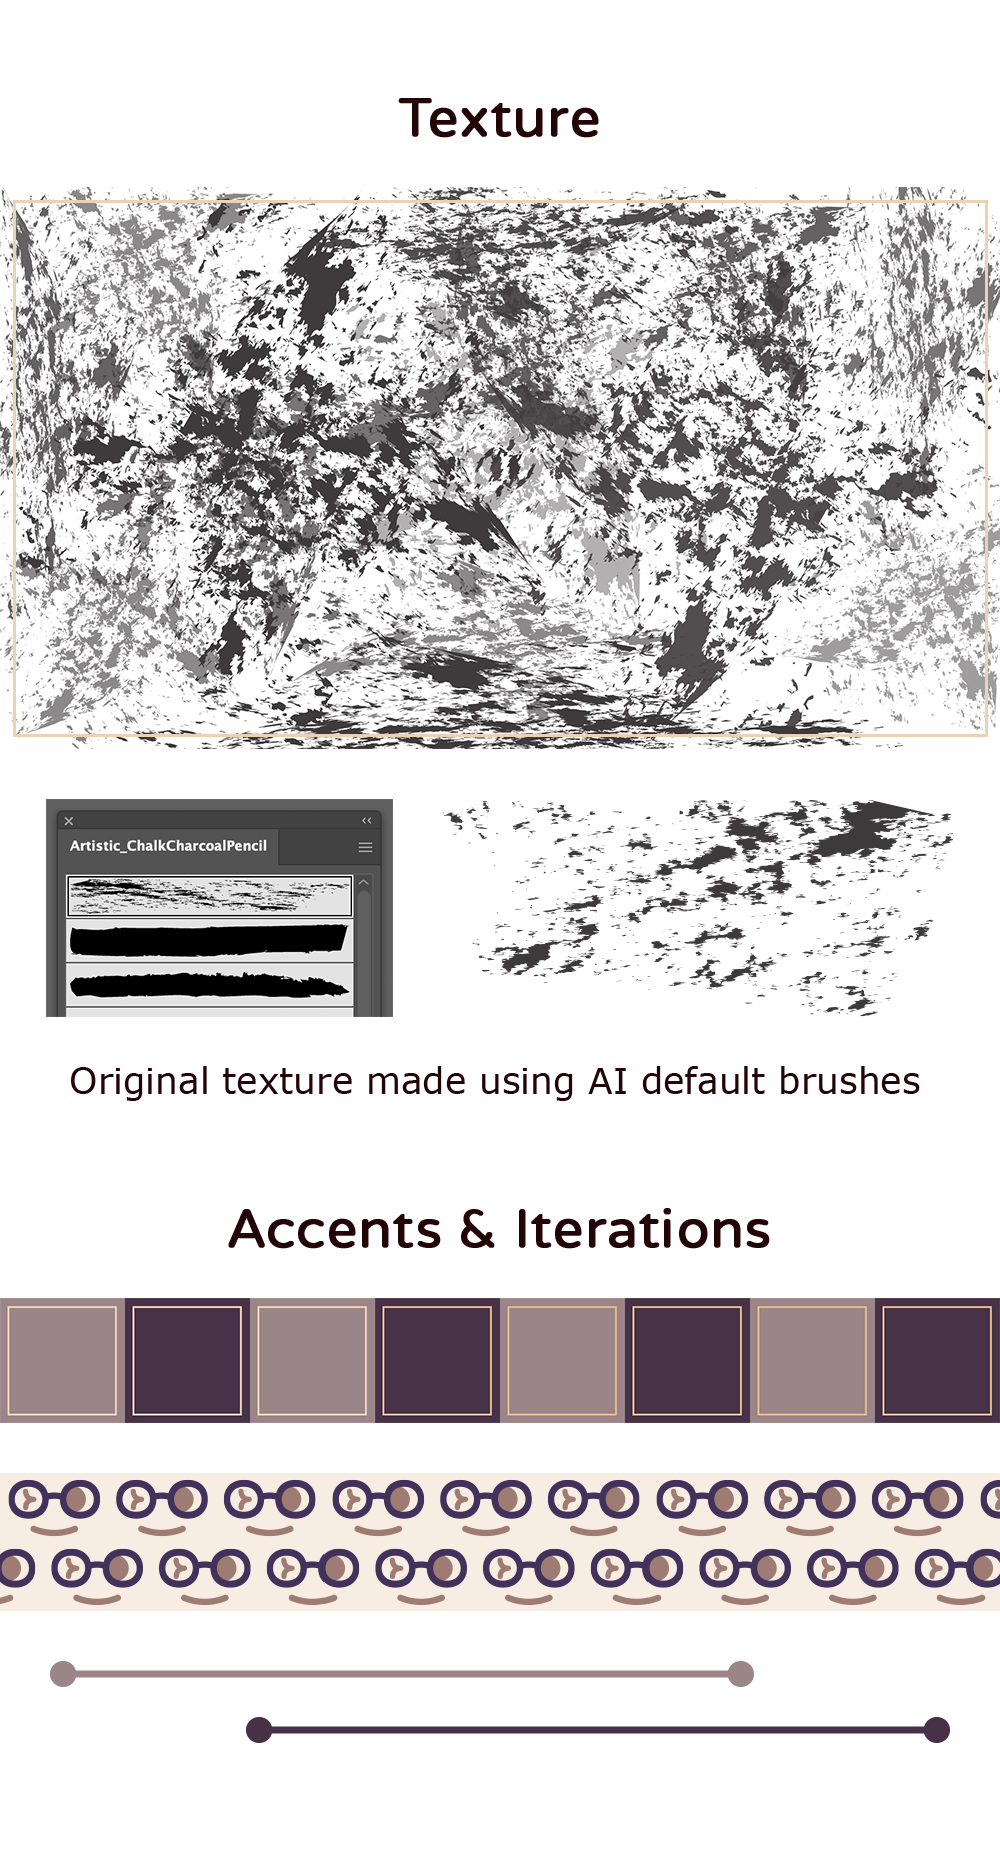 A graphic explaining other the graphic elements in my brand: In the top half, the texture in greyscale with small notes on how I created it. In the bottom half, other accents and iterations using the graphic elements.